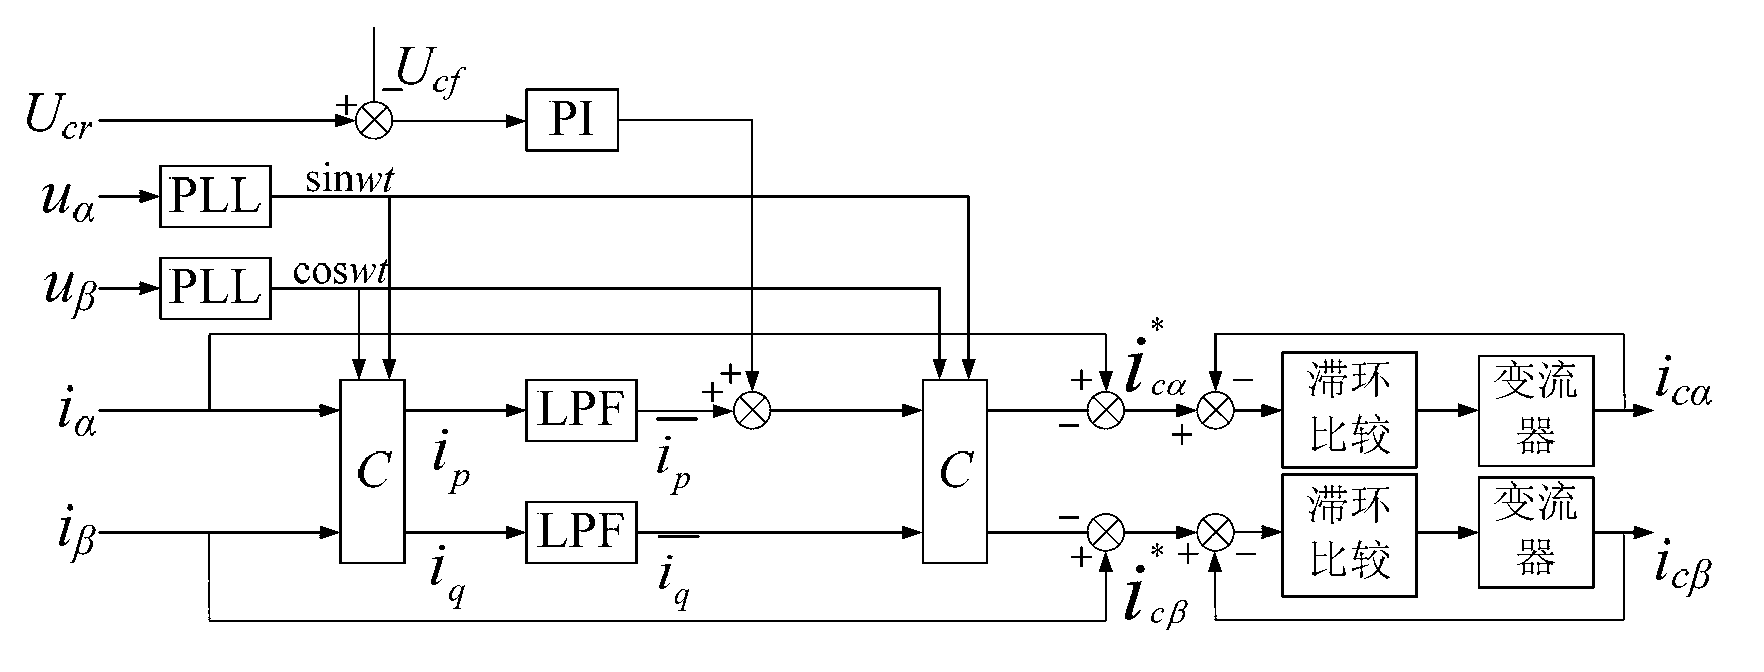 Two-phase STATCOM (Static Synchronous Compensator) management device on traction side of electrified railway, and control method of device